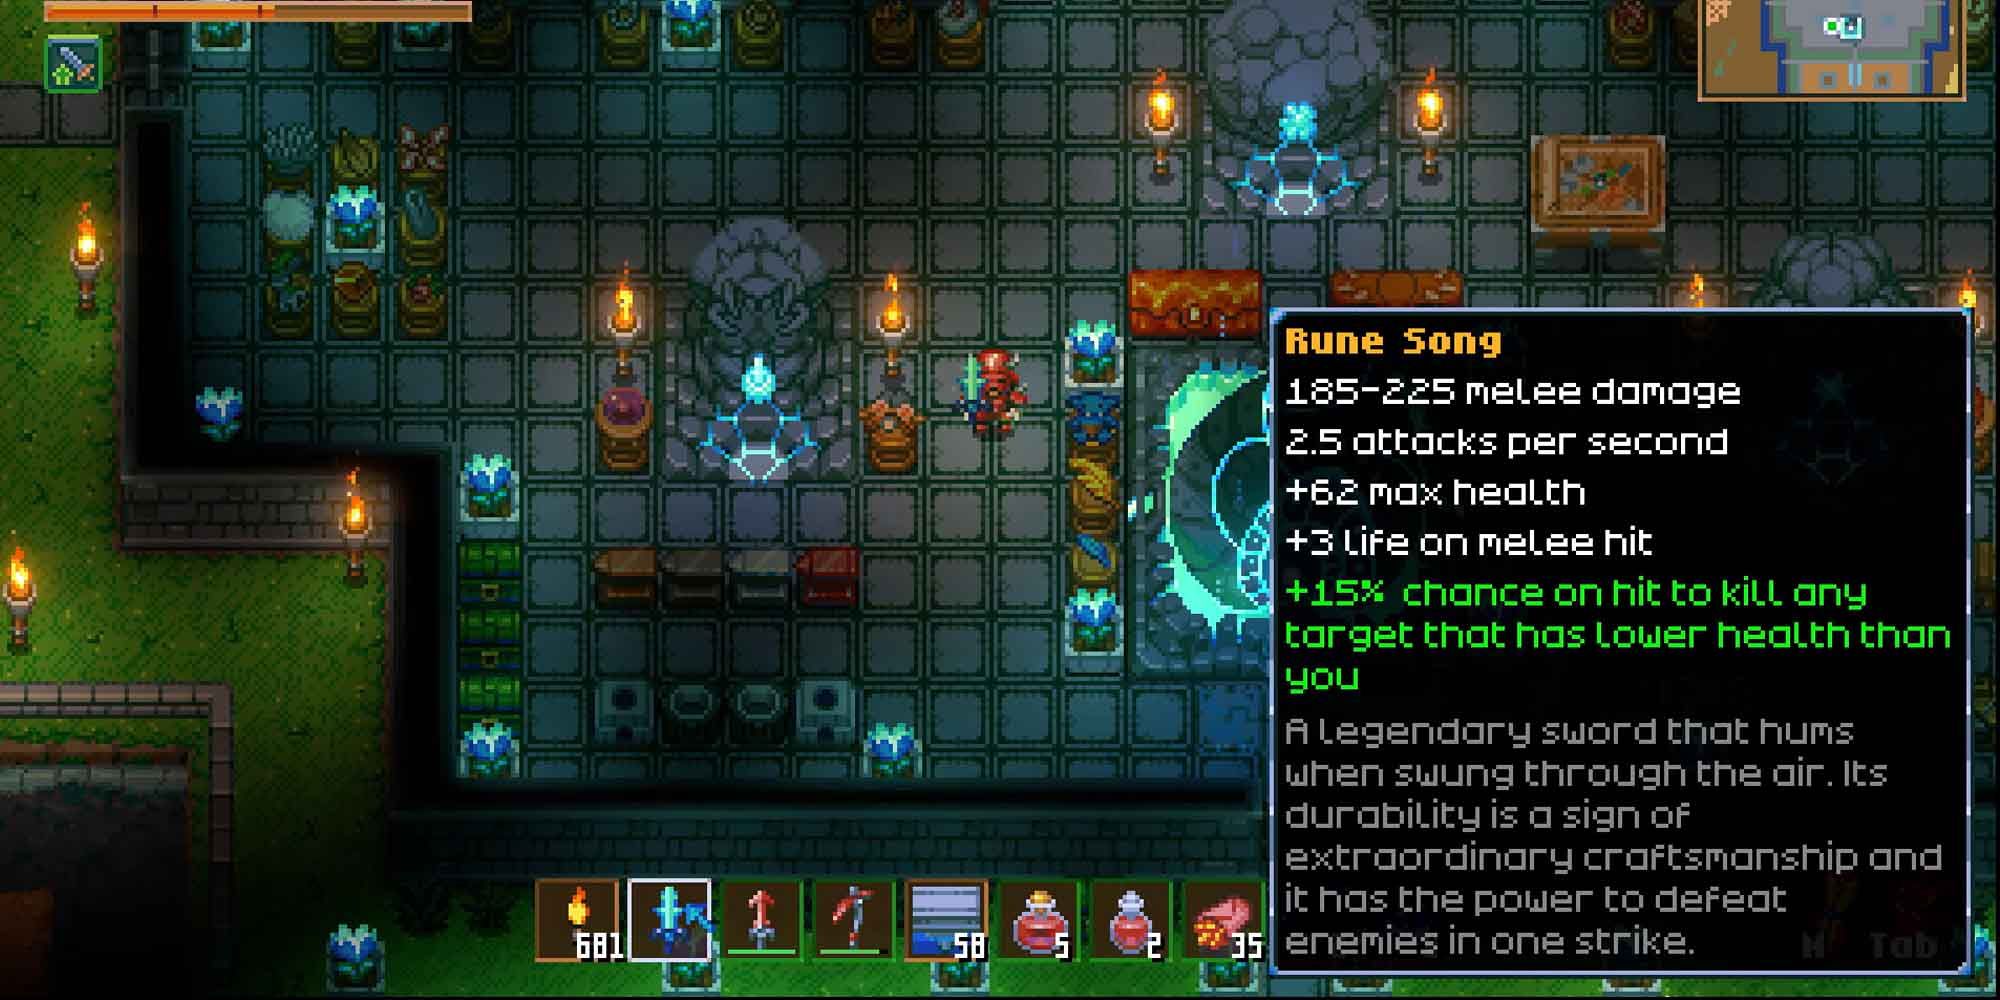 The Rune Song in Core Keeper